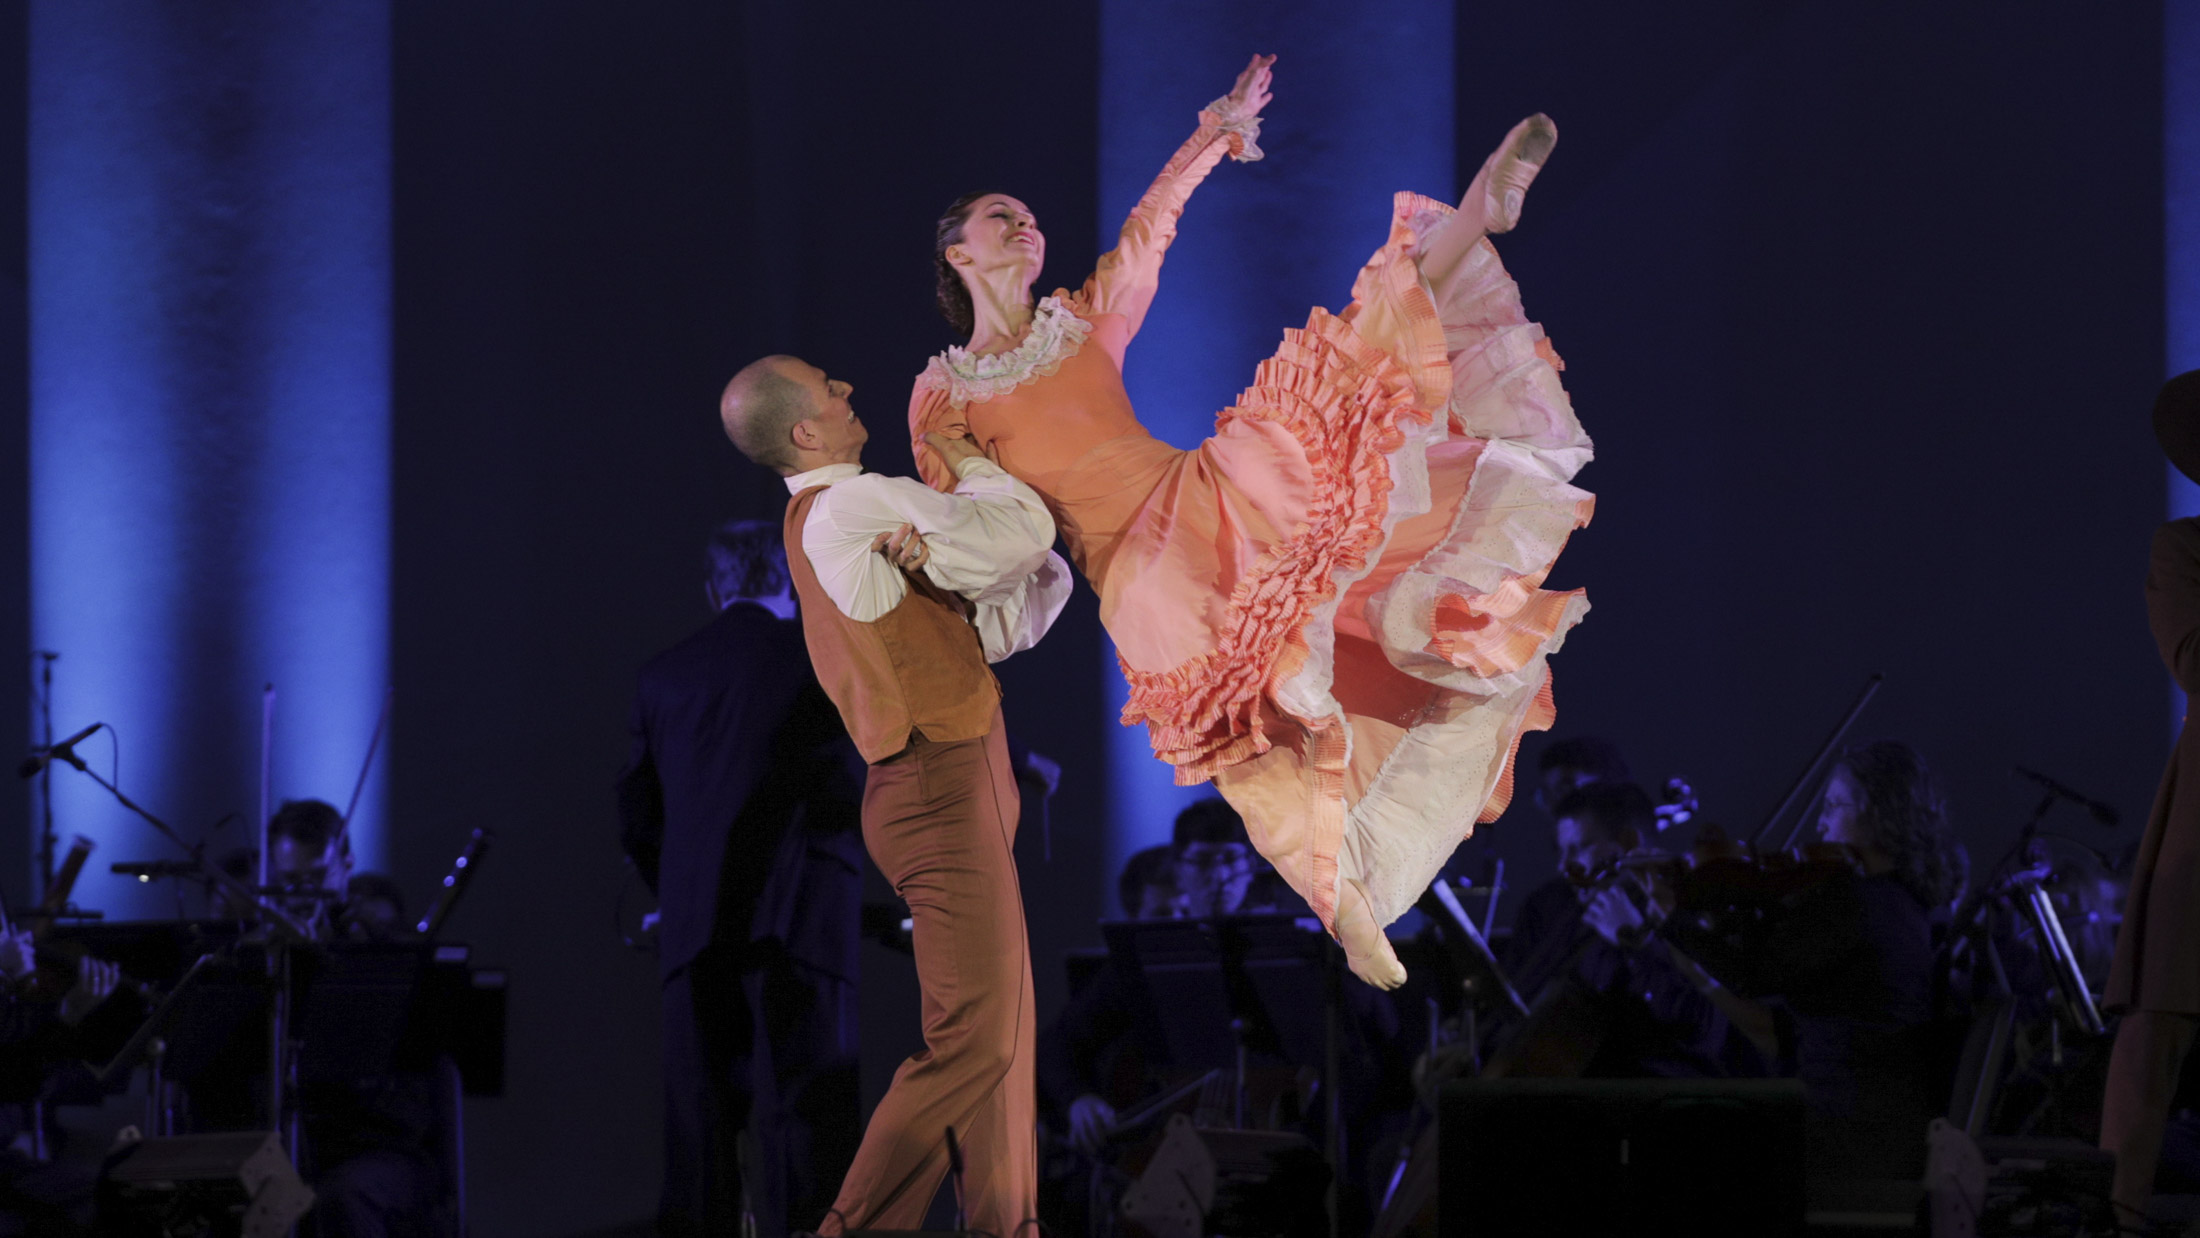 Man lifting a female dancer in a pink dress in the air